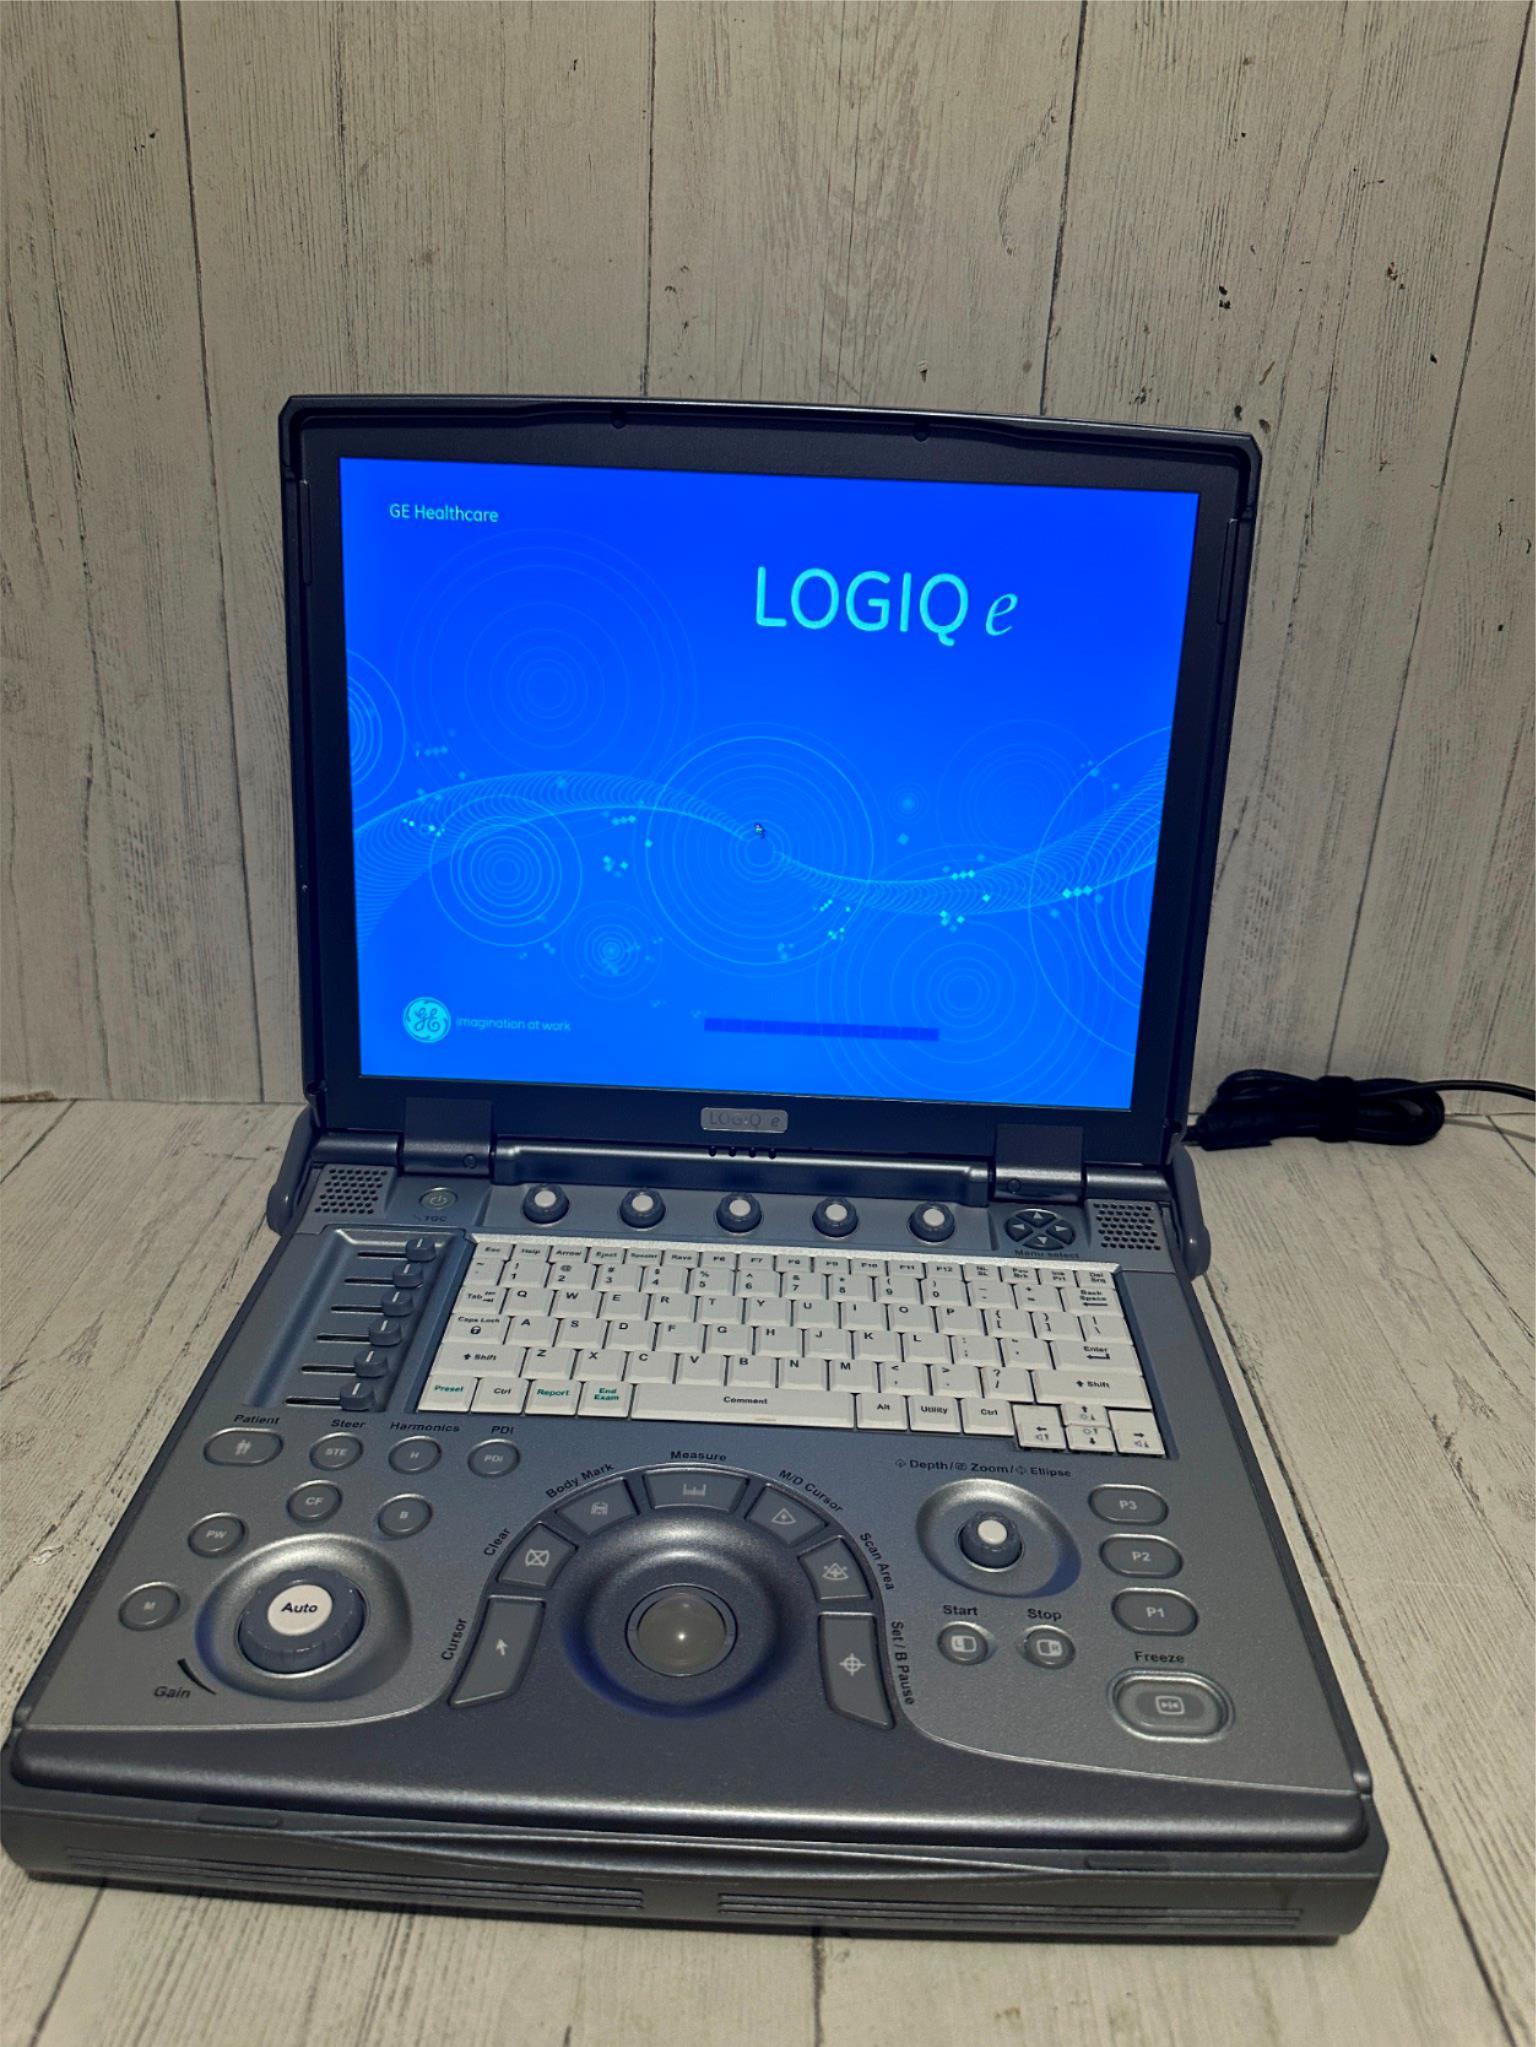 GE LOGIQ E  Ultrasound DOM 2012 with two probe 4c-Rs and 3S-rs DIAGNOSTIC ULTRASOUND MACHINES FOR SALE